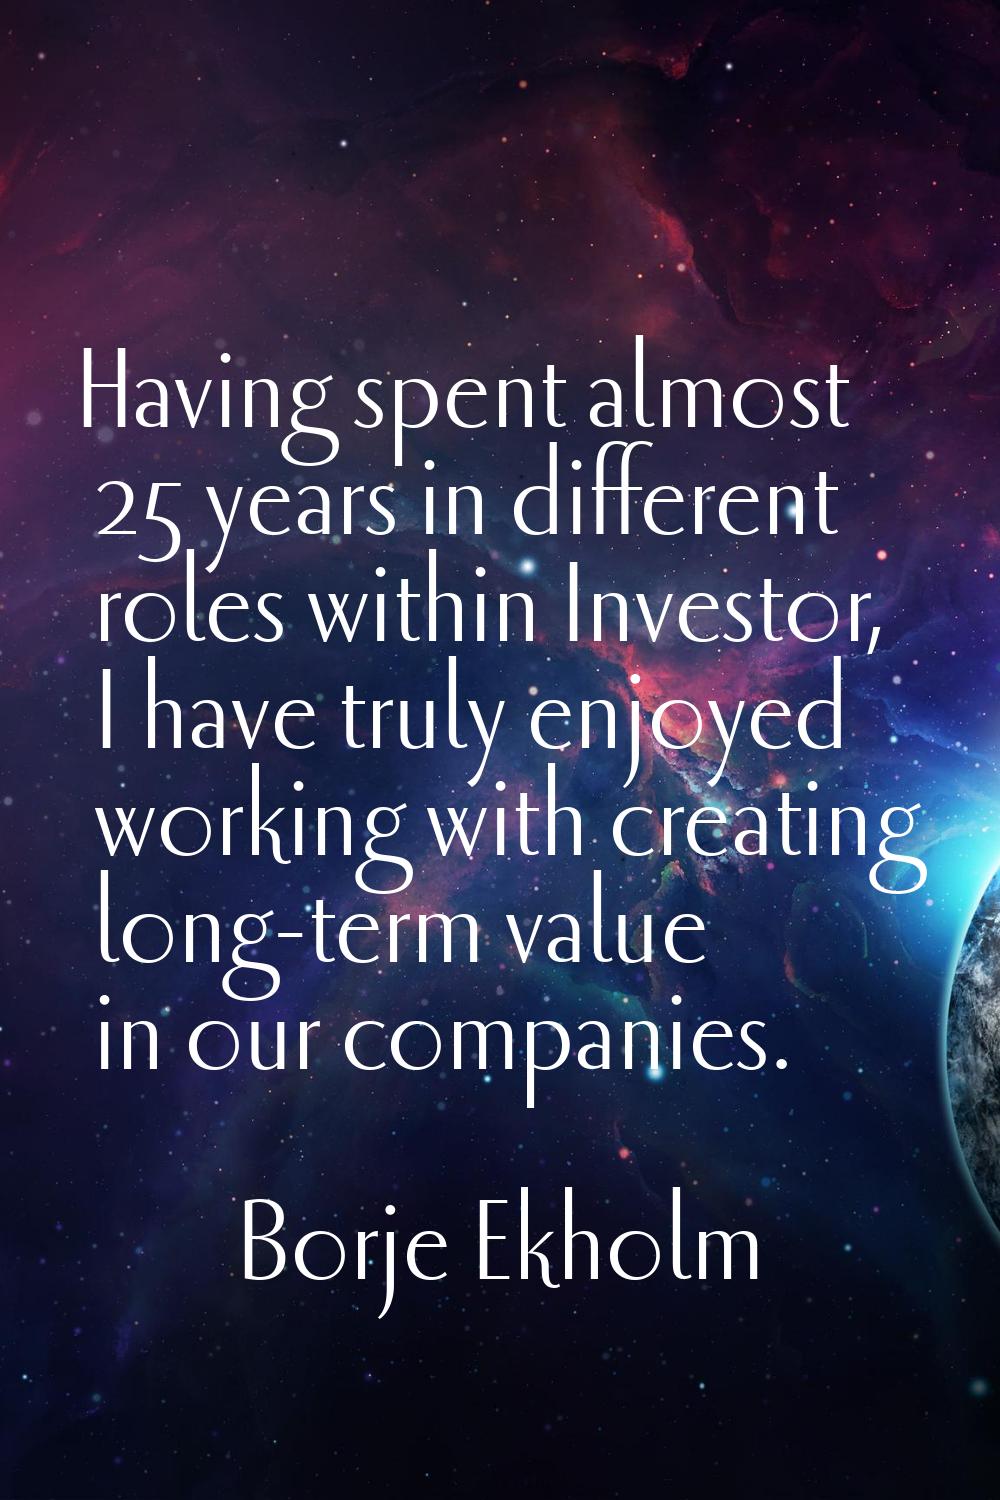 Having spent almost 25 years in different roles within Investor, I have truly enjoyed working with 